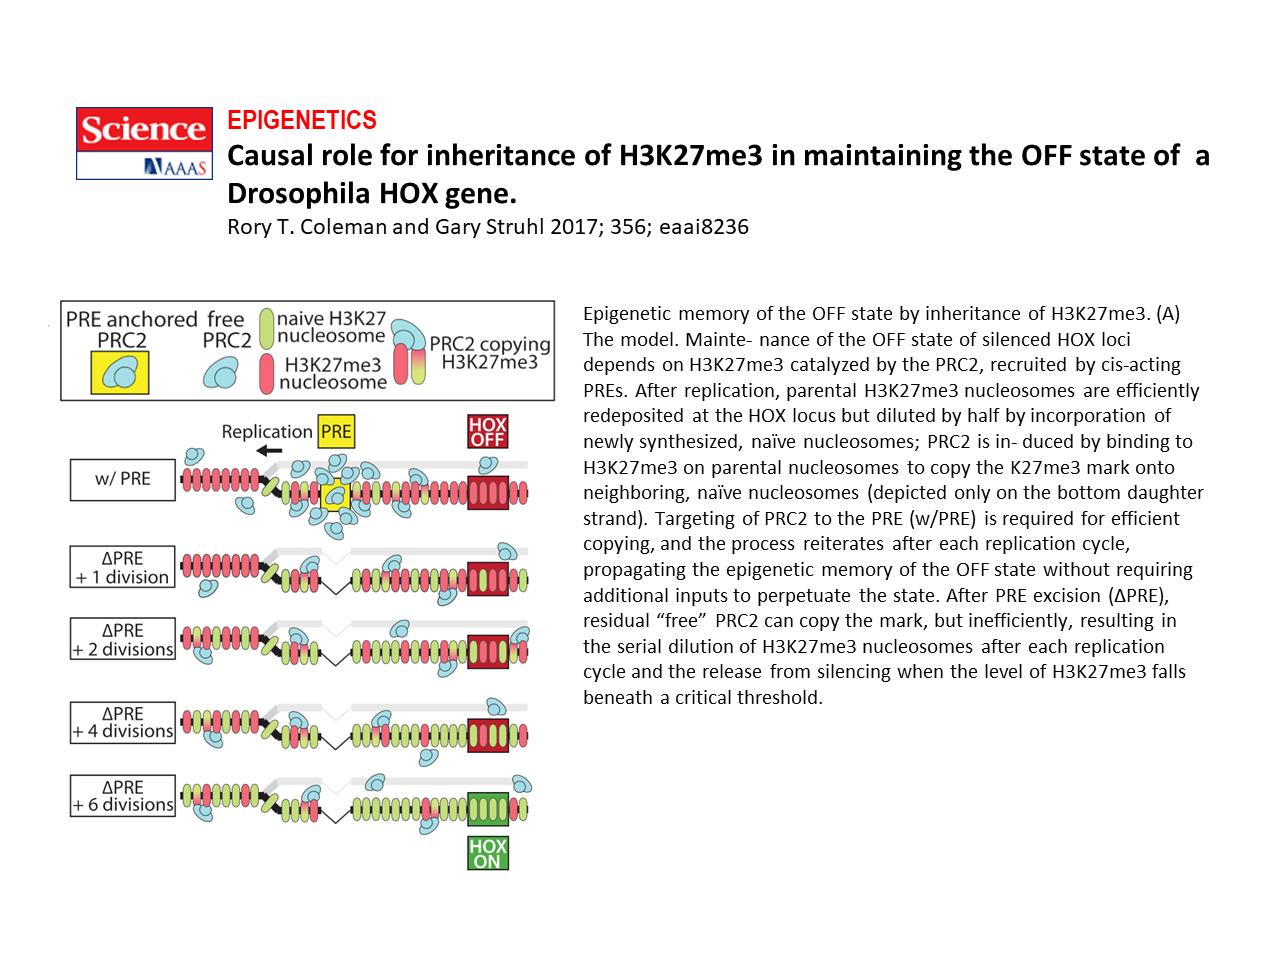 Causal role for inheritance of H3K27me3 in maintaining the Off state of a Drosophia HOX gene